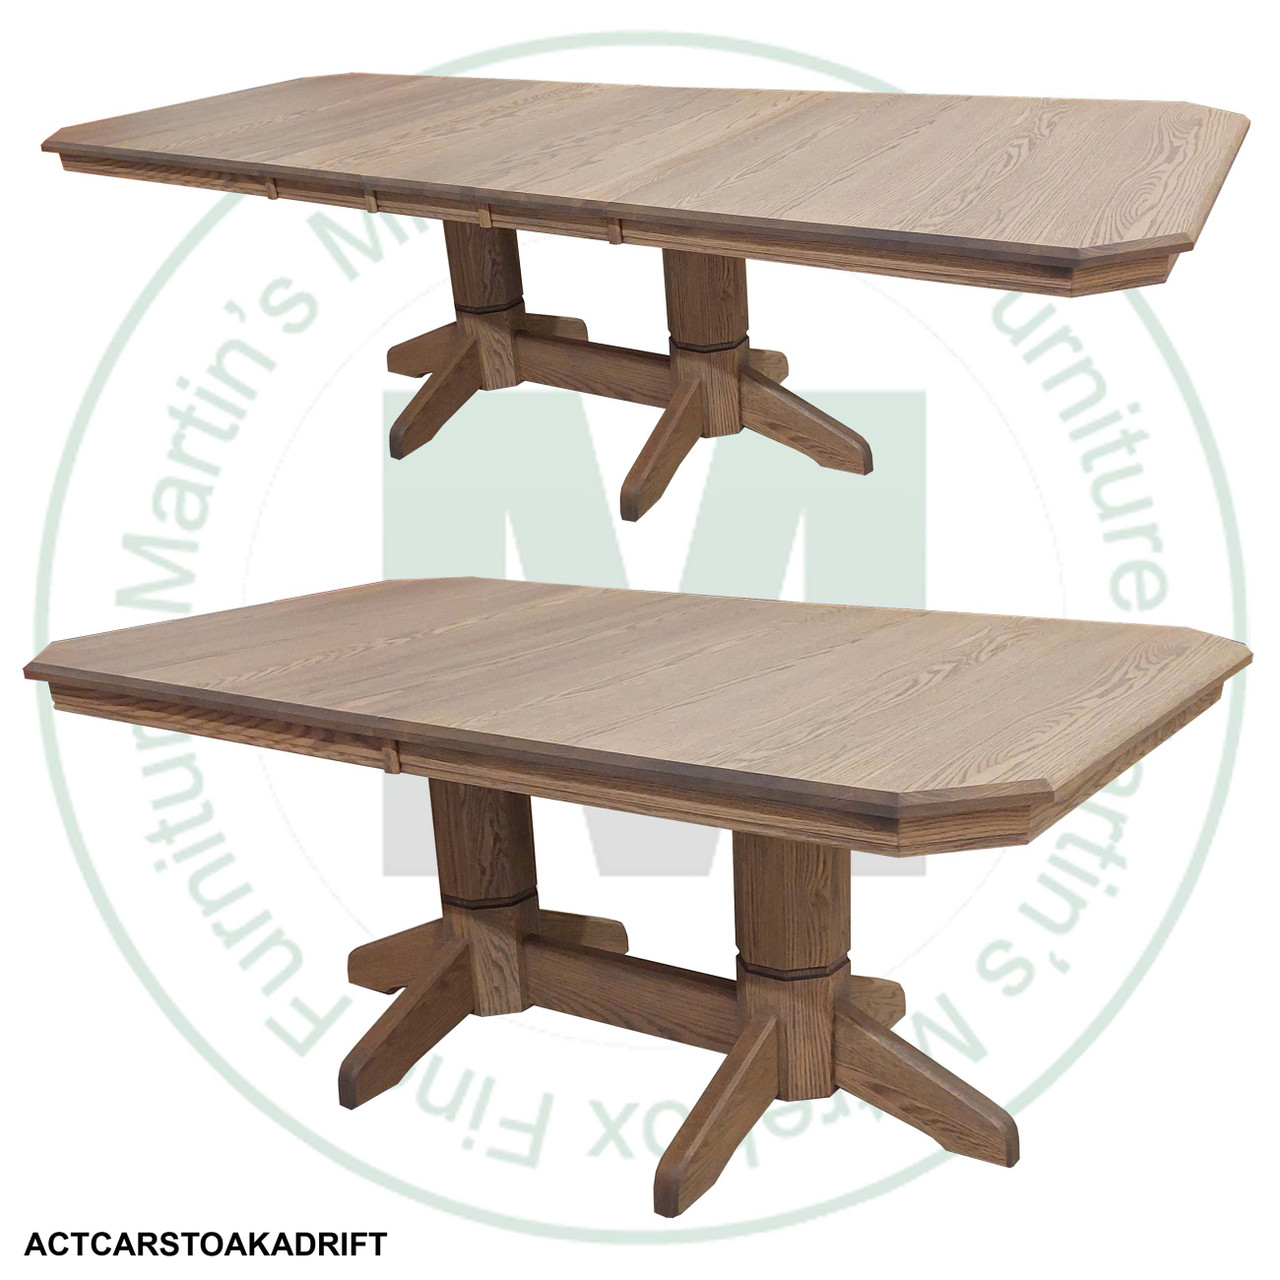 Oak Urban Classic Double Pedestal Table 48''D x 96''W x 30''H With 3 - 12'' Leaves